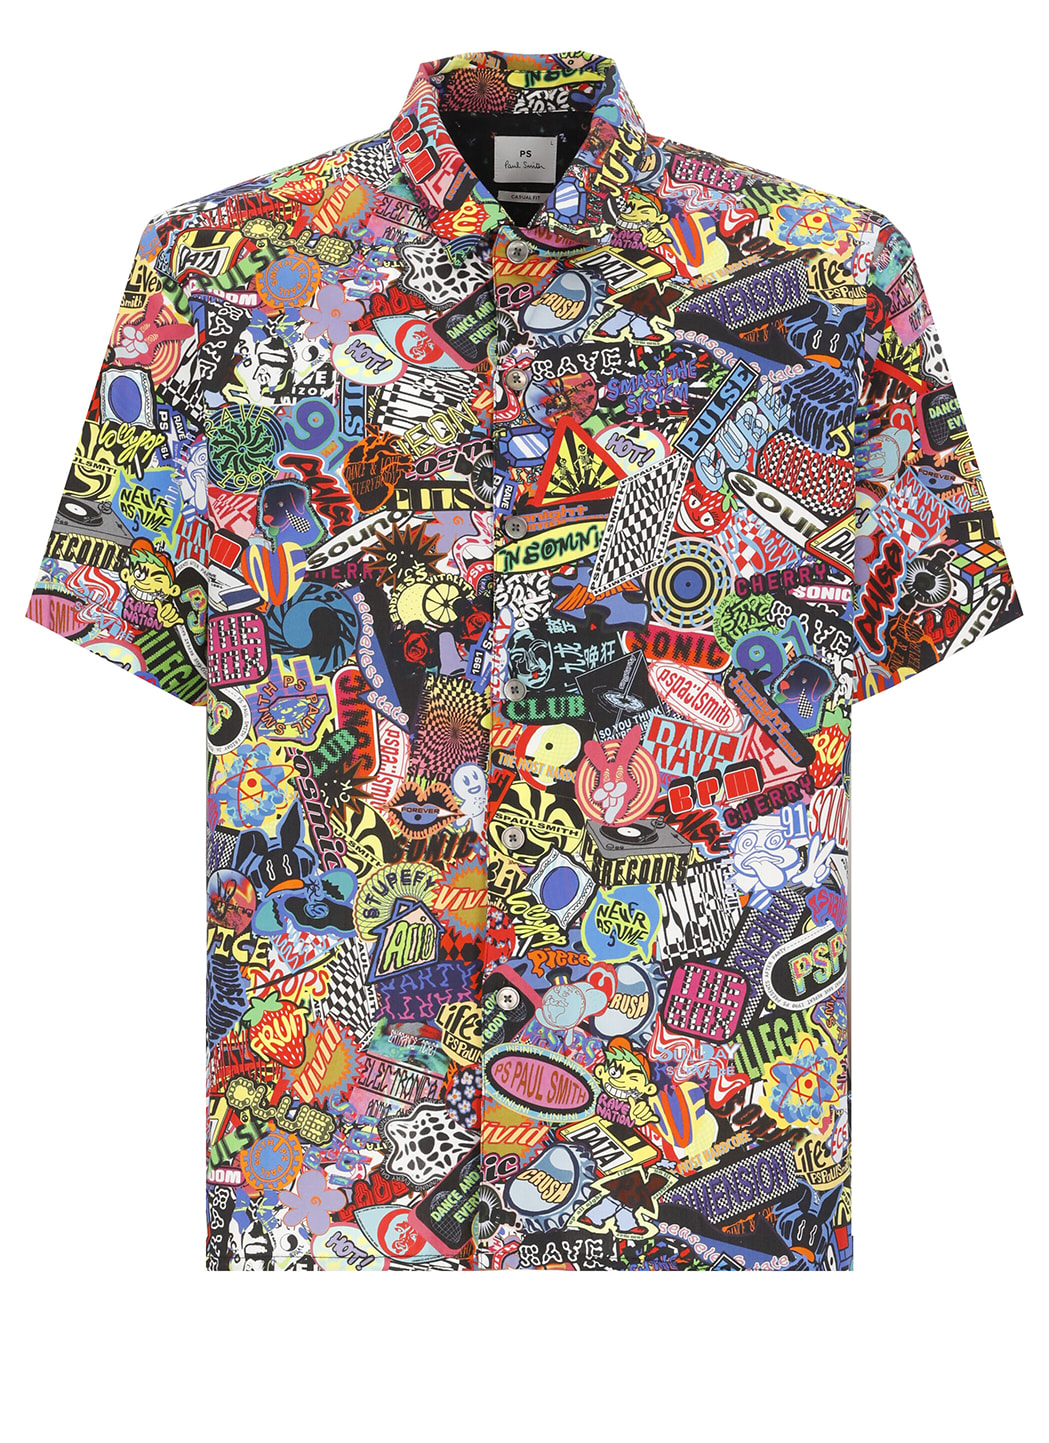 Paul Smith Shirt With Stickers Print